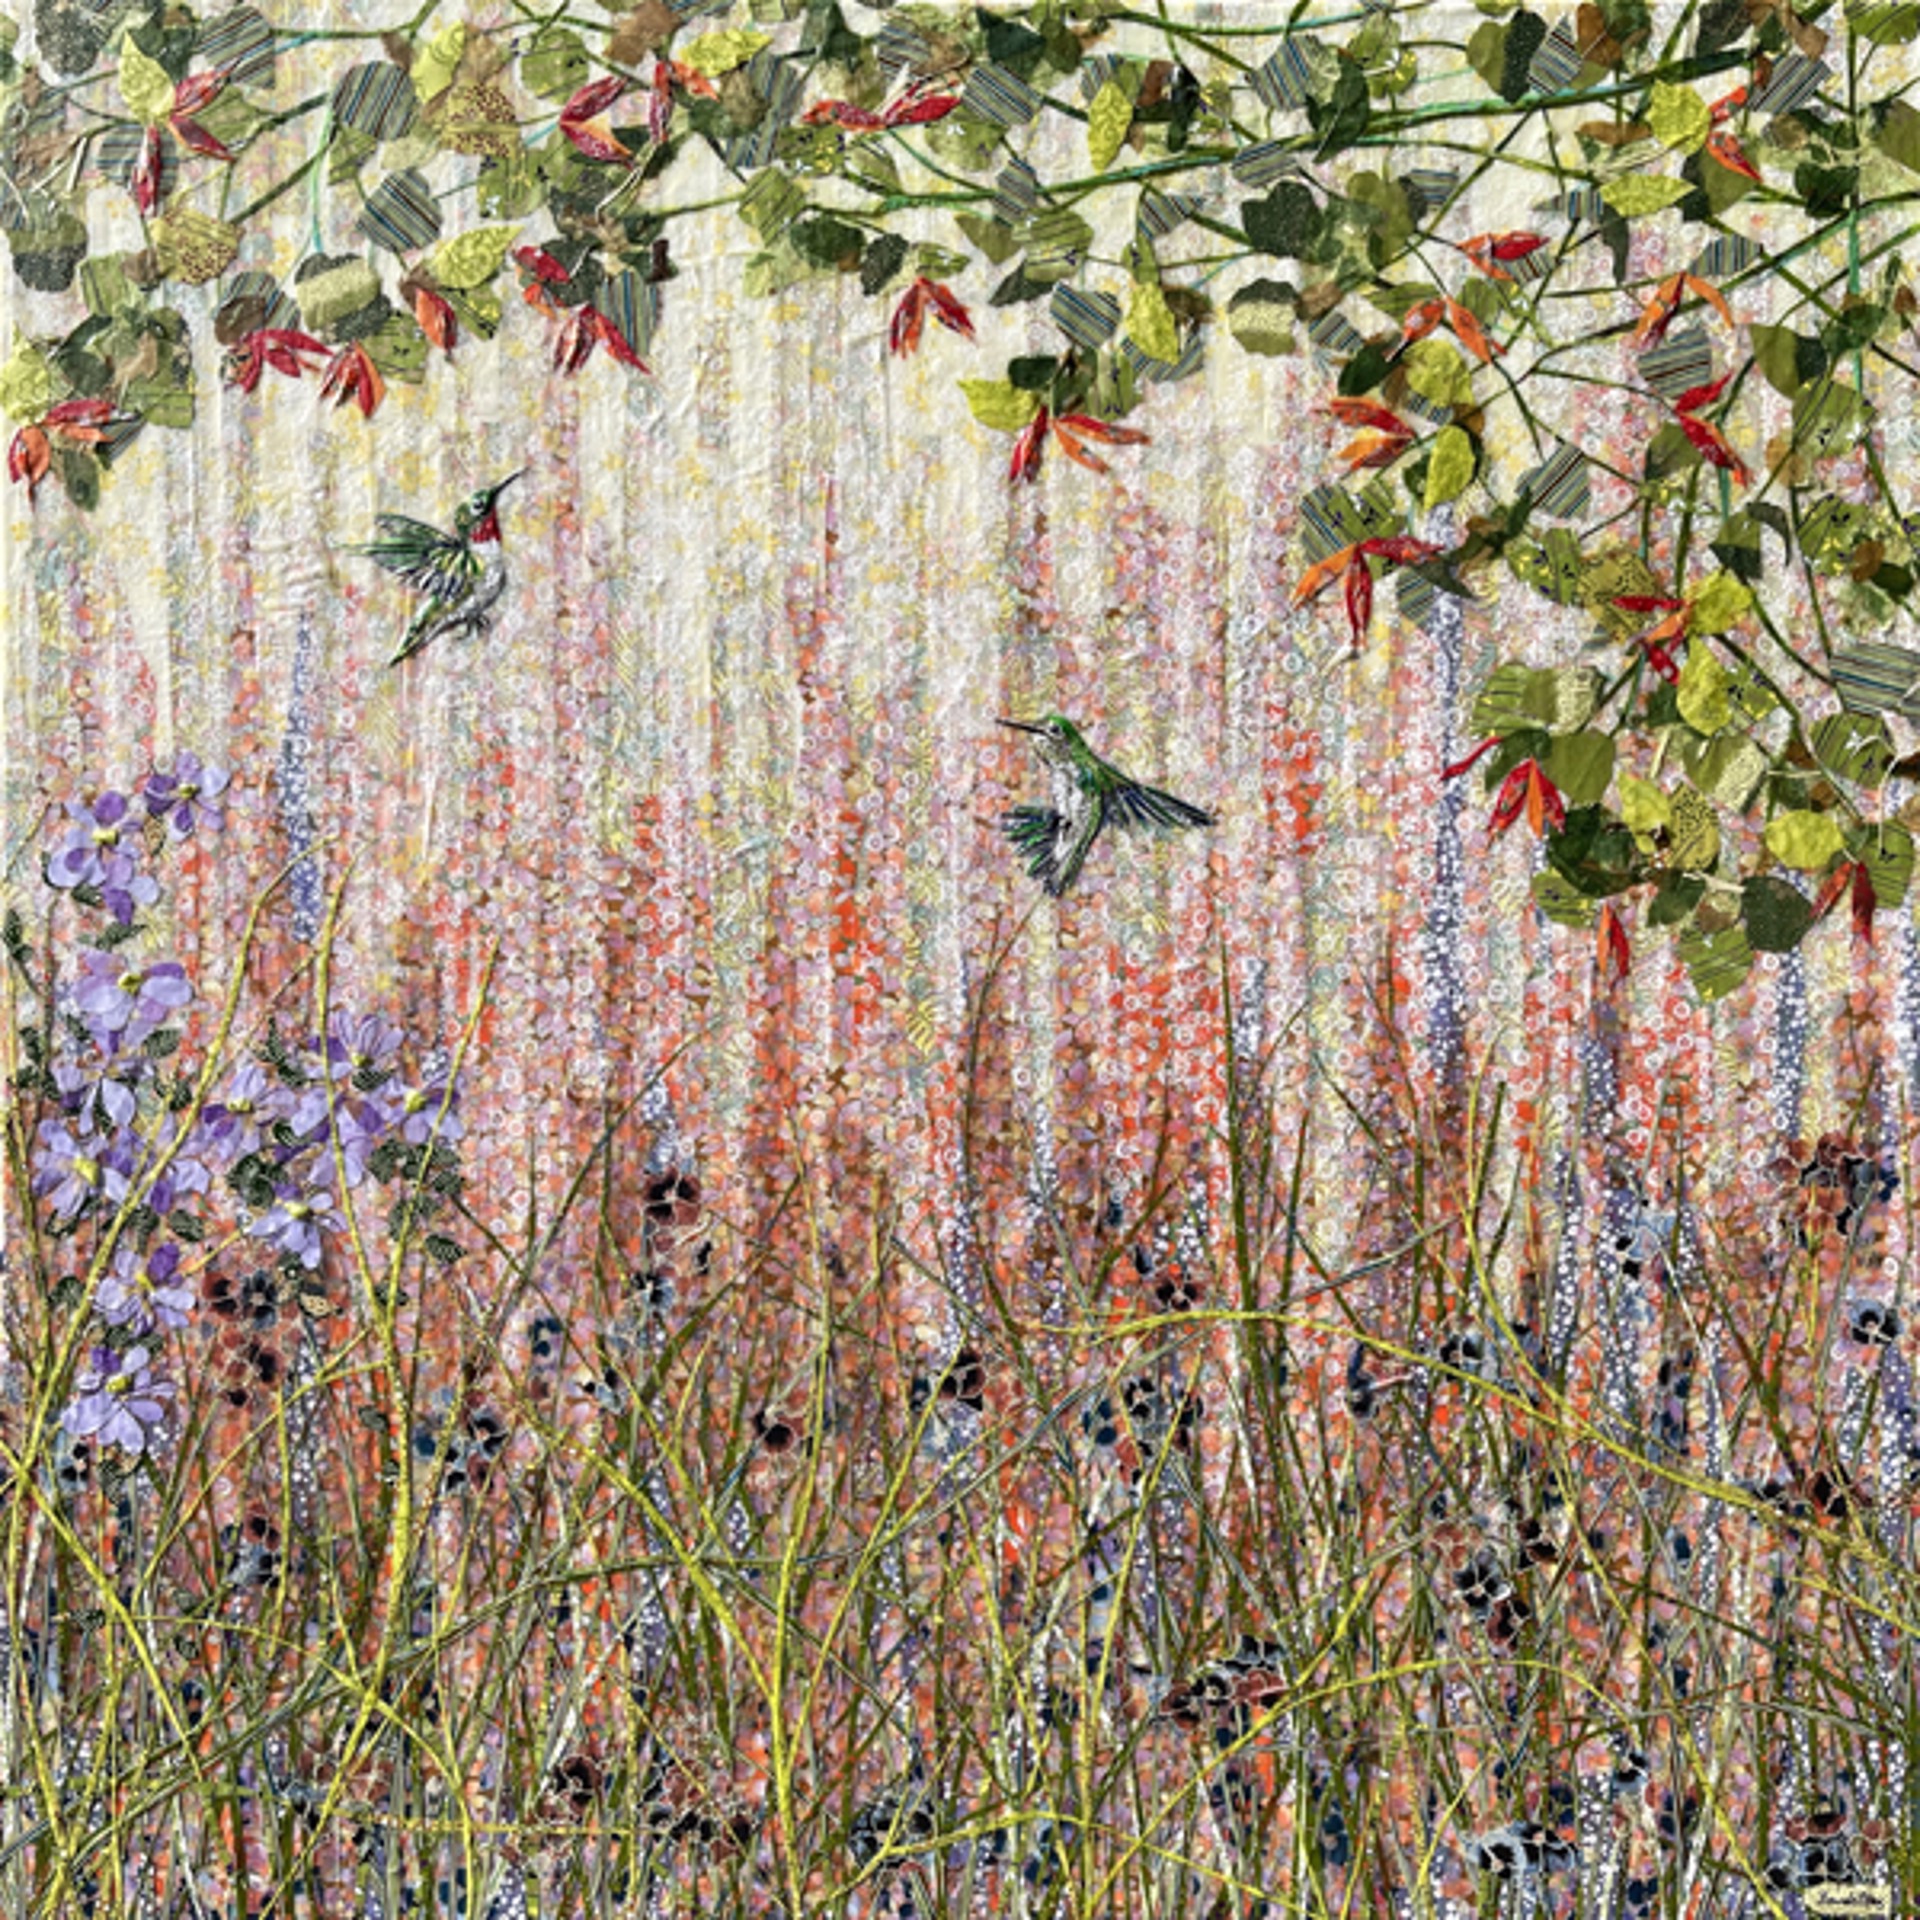 Ruby-throated Hummingbirds and Summer Blooms by Laura Adams